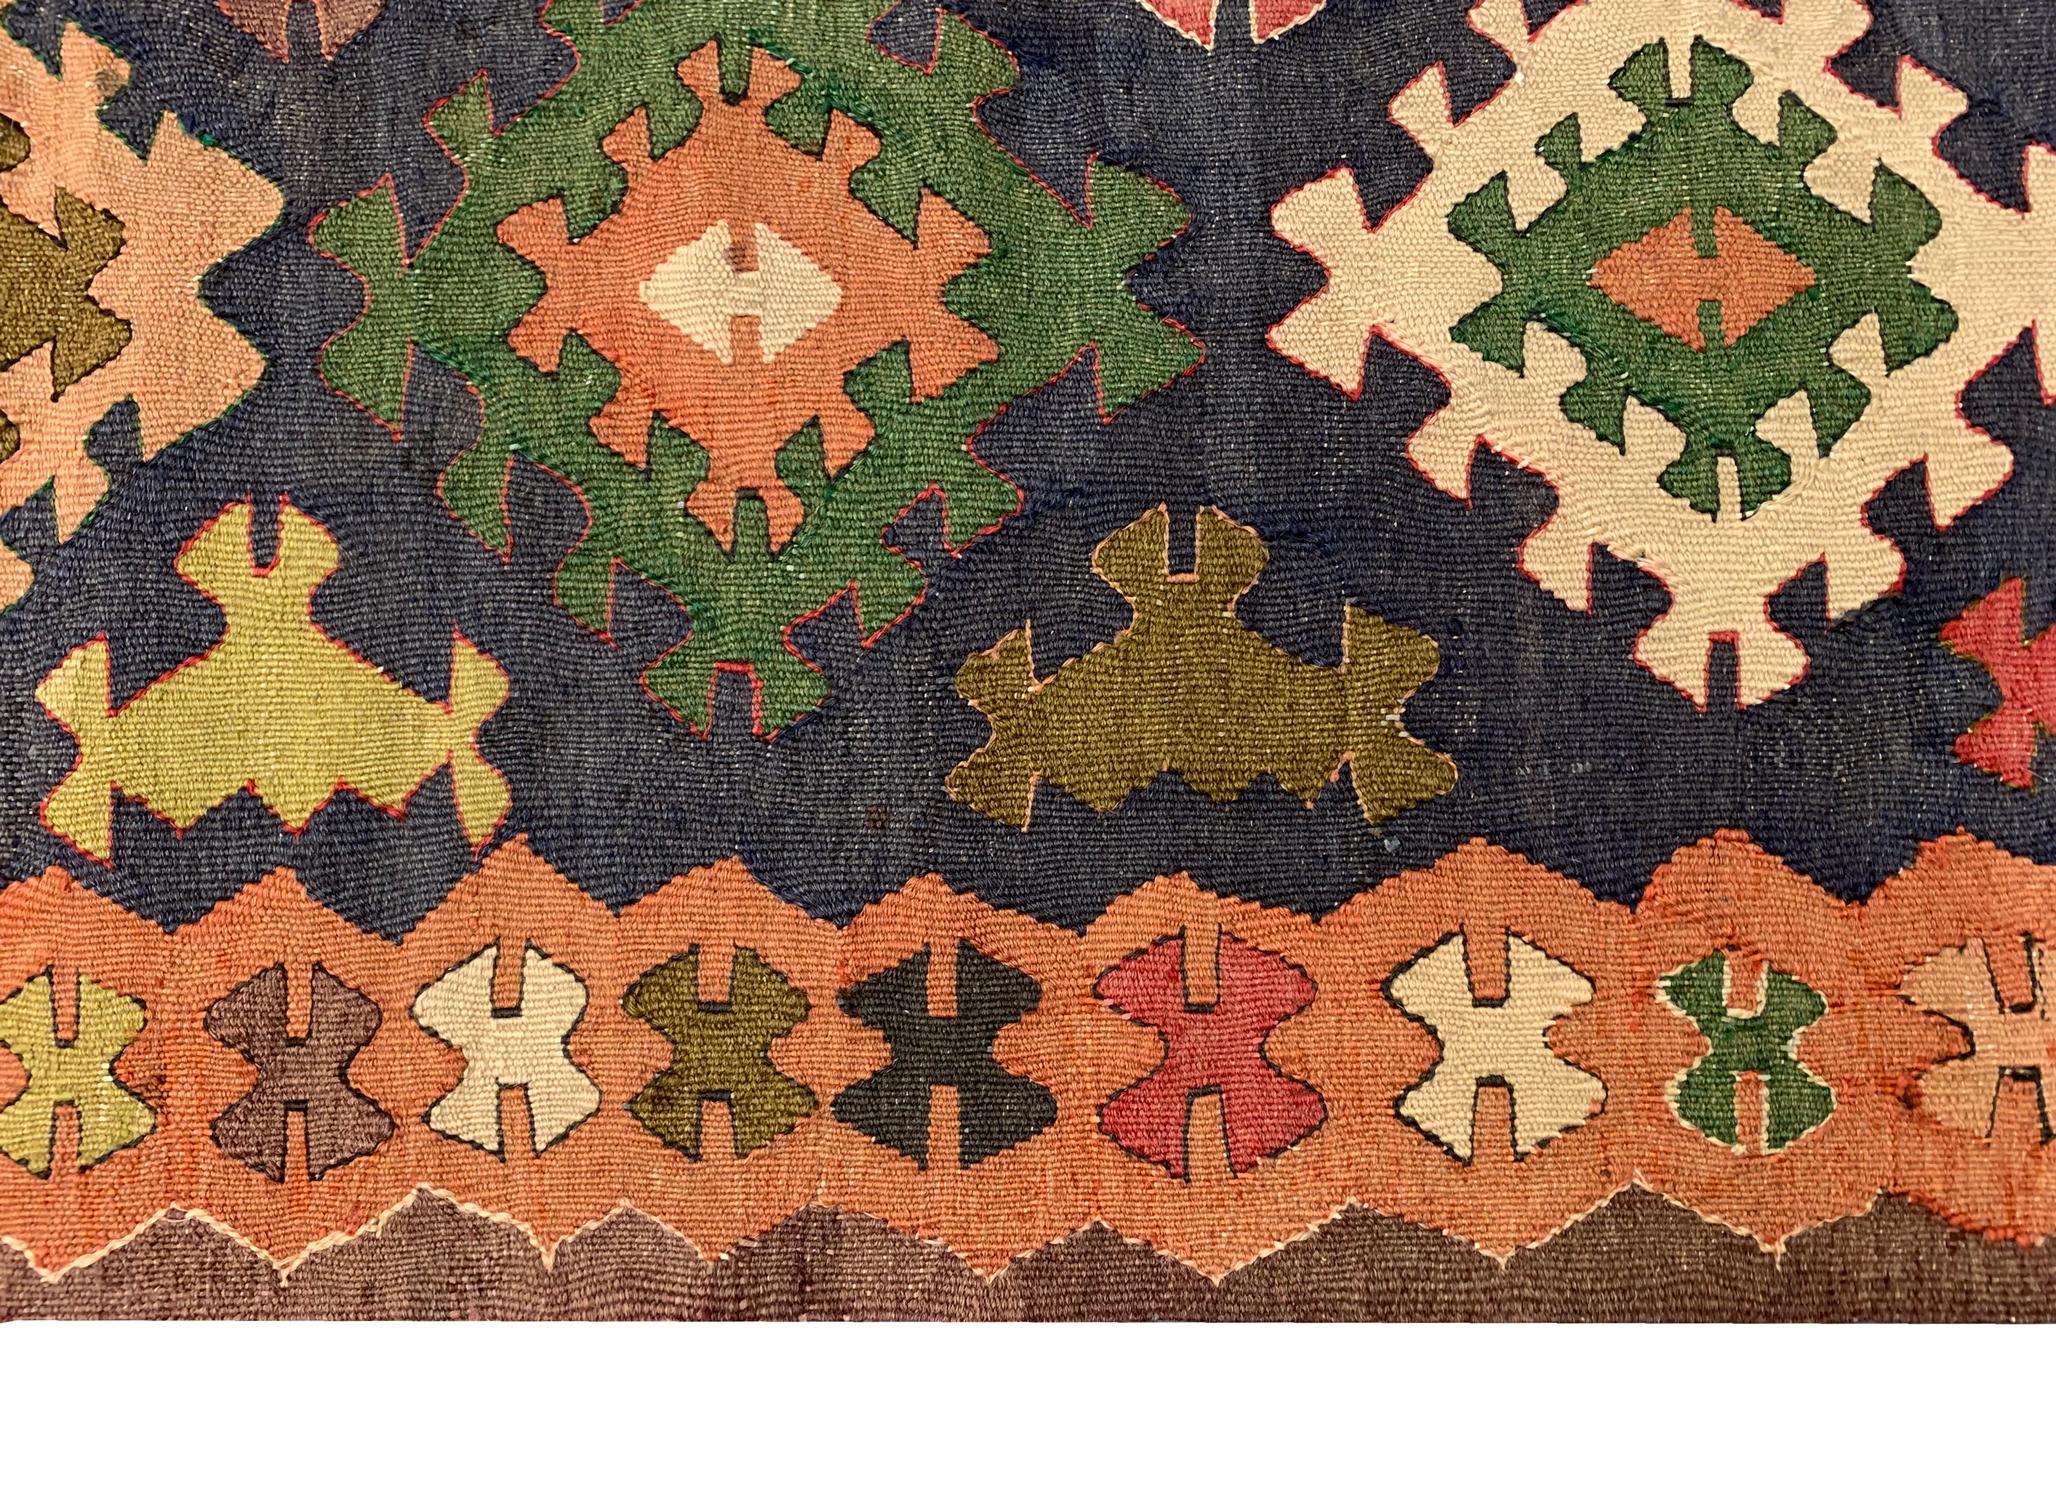 Hand-Knotted Handwoven Kilims Antique Caucasian Kilim Rug Geometric Wool Carpet For Sale